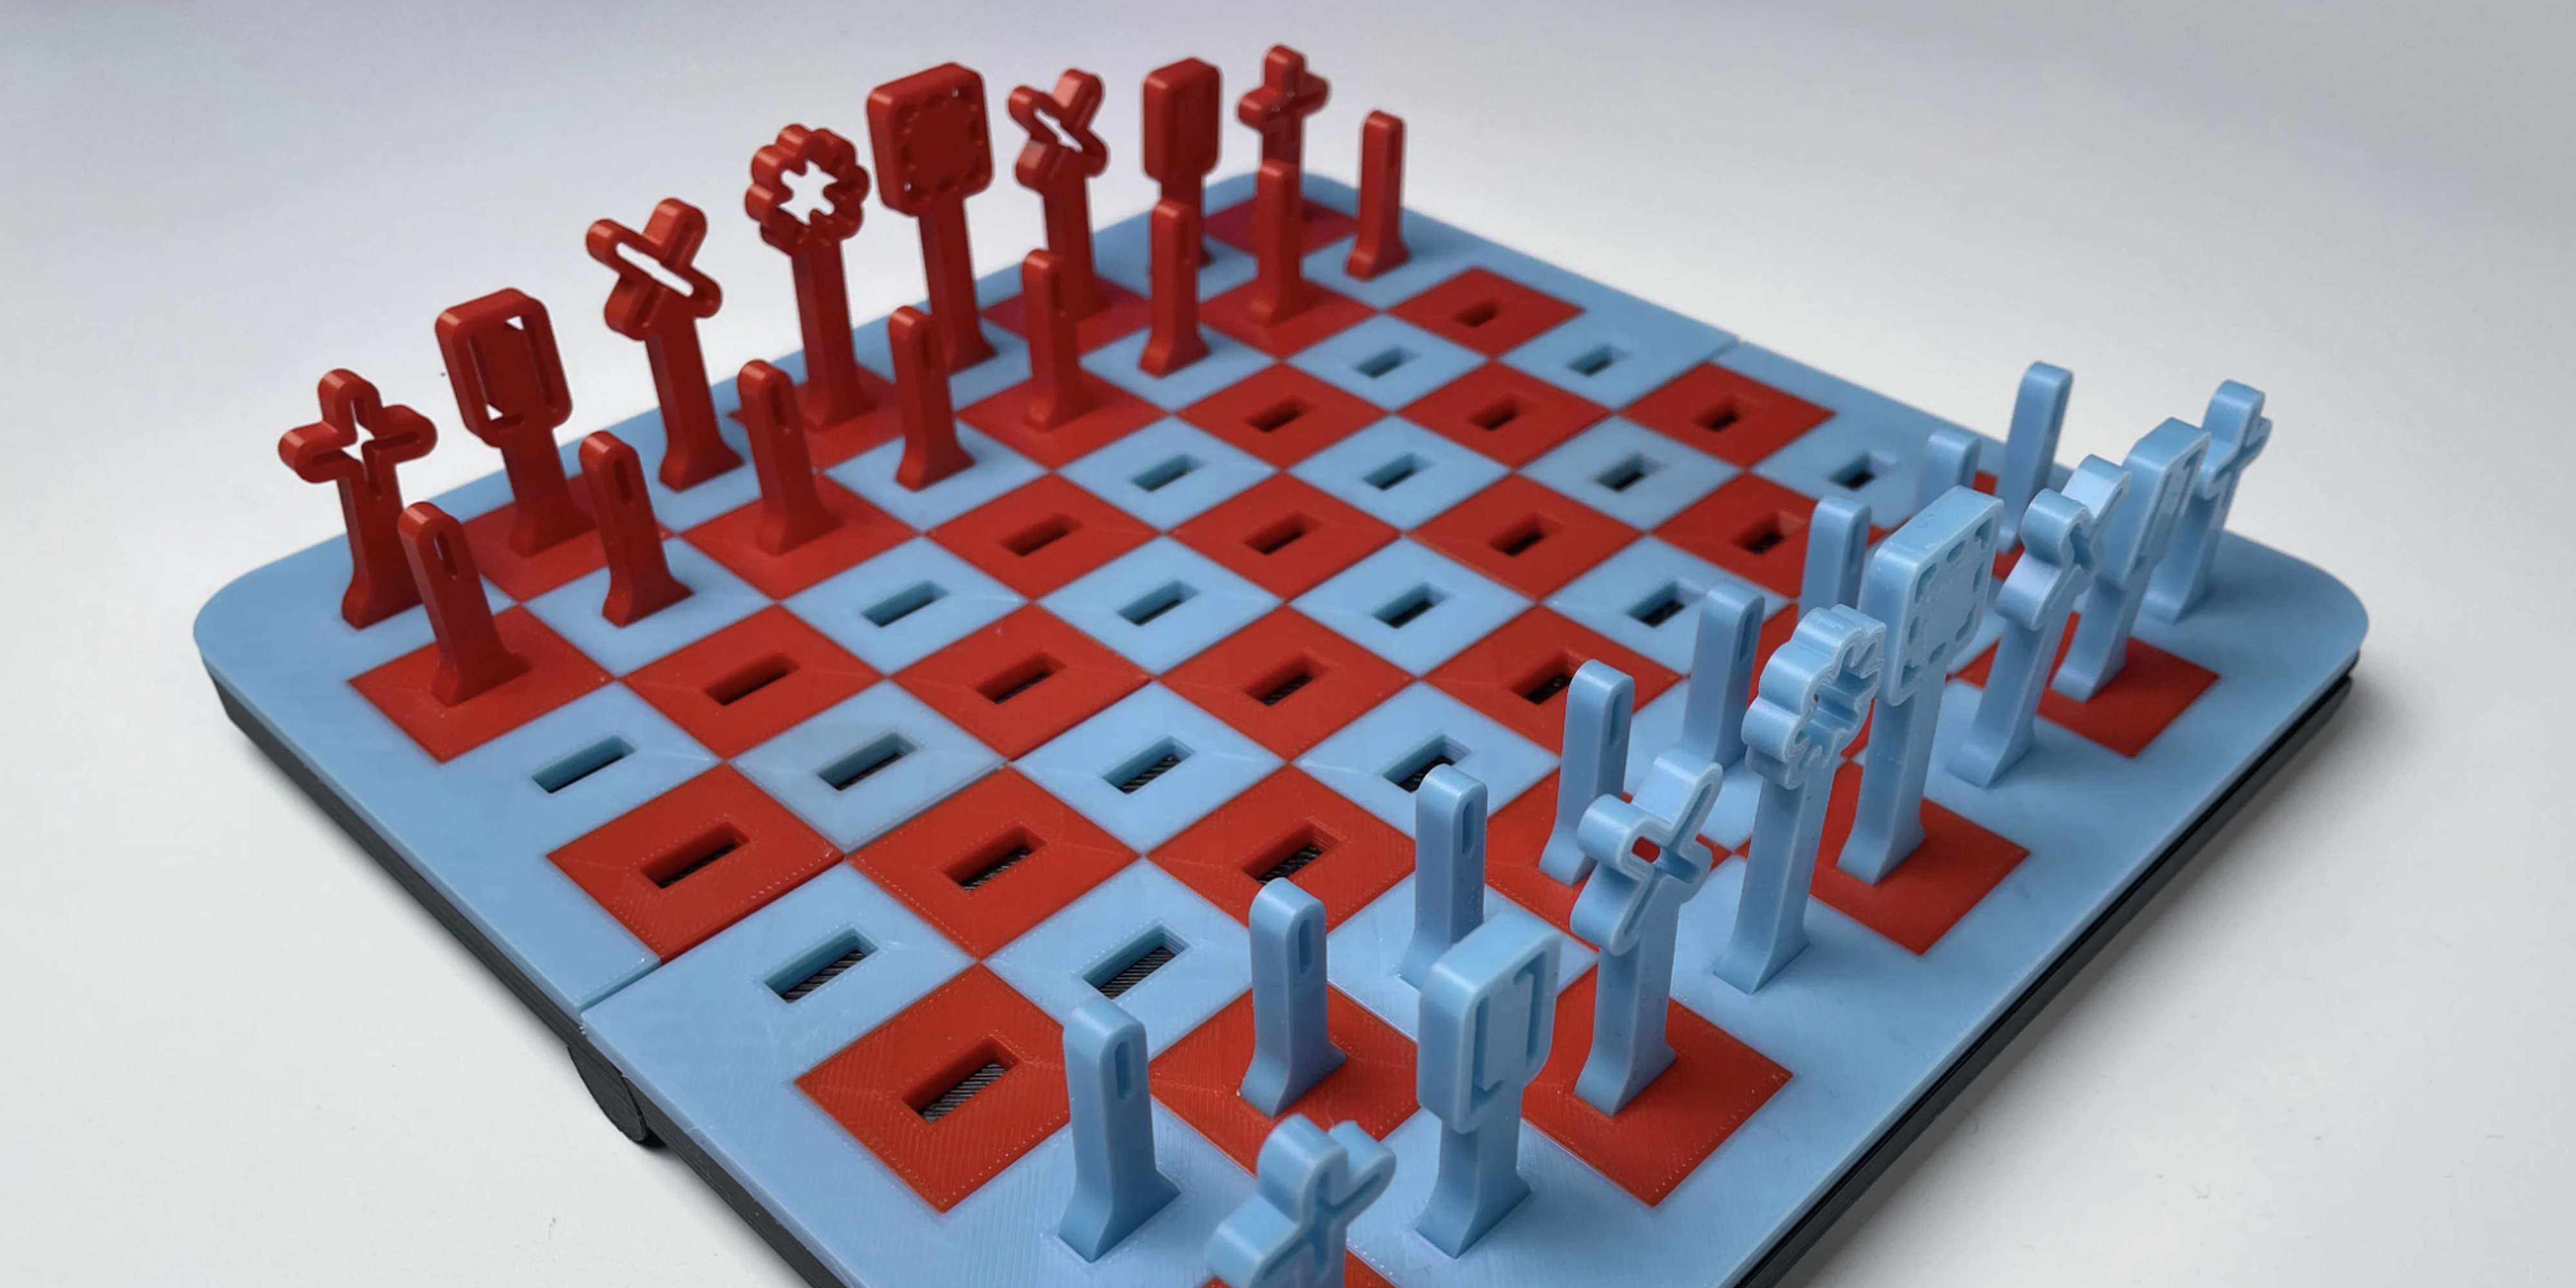 Find here a selection of the best 3D models of 3D printable files of chess sets